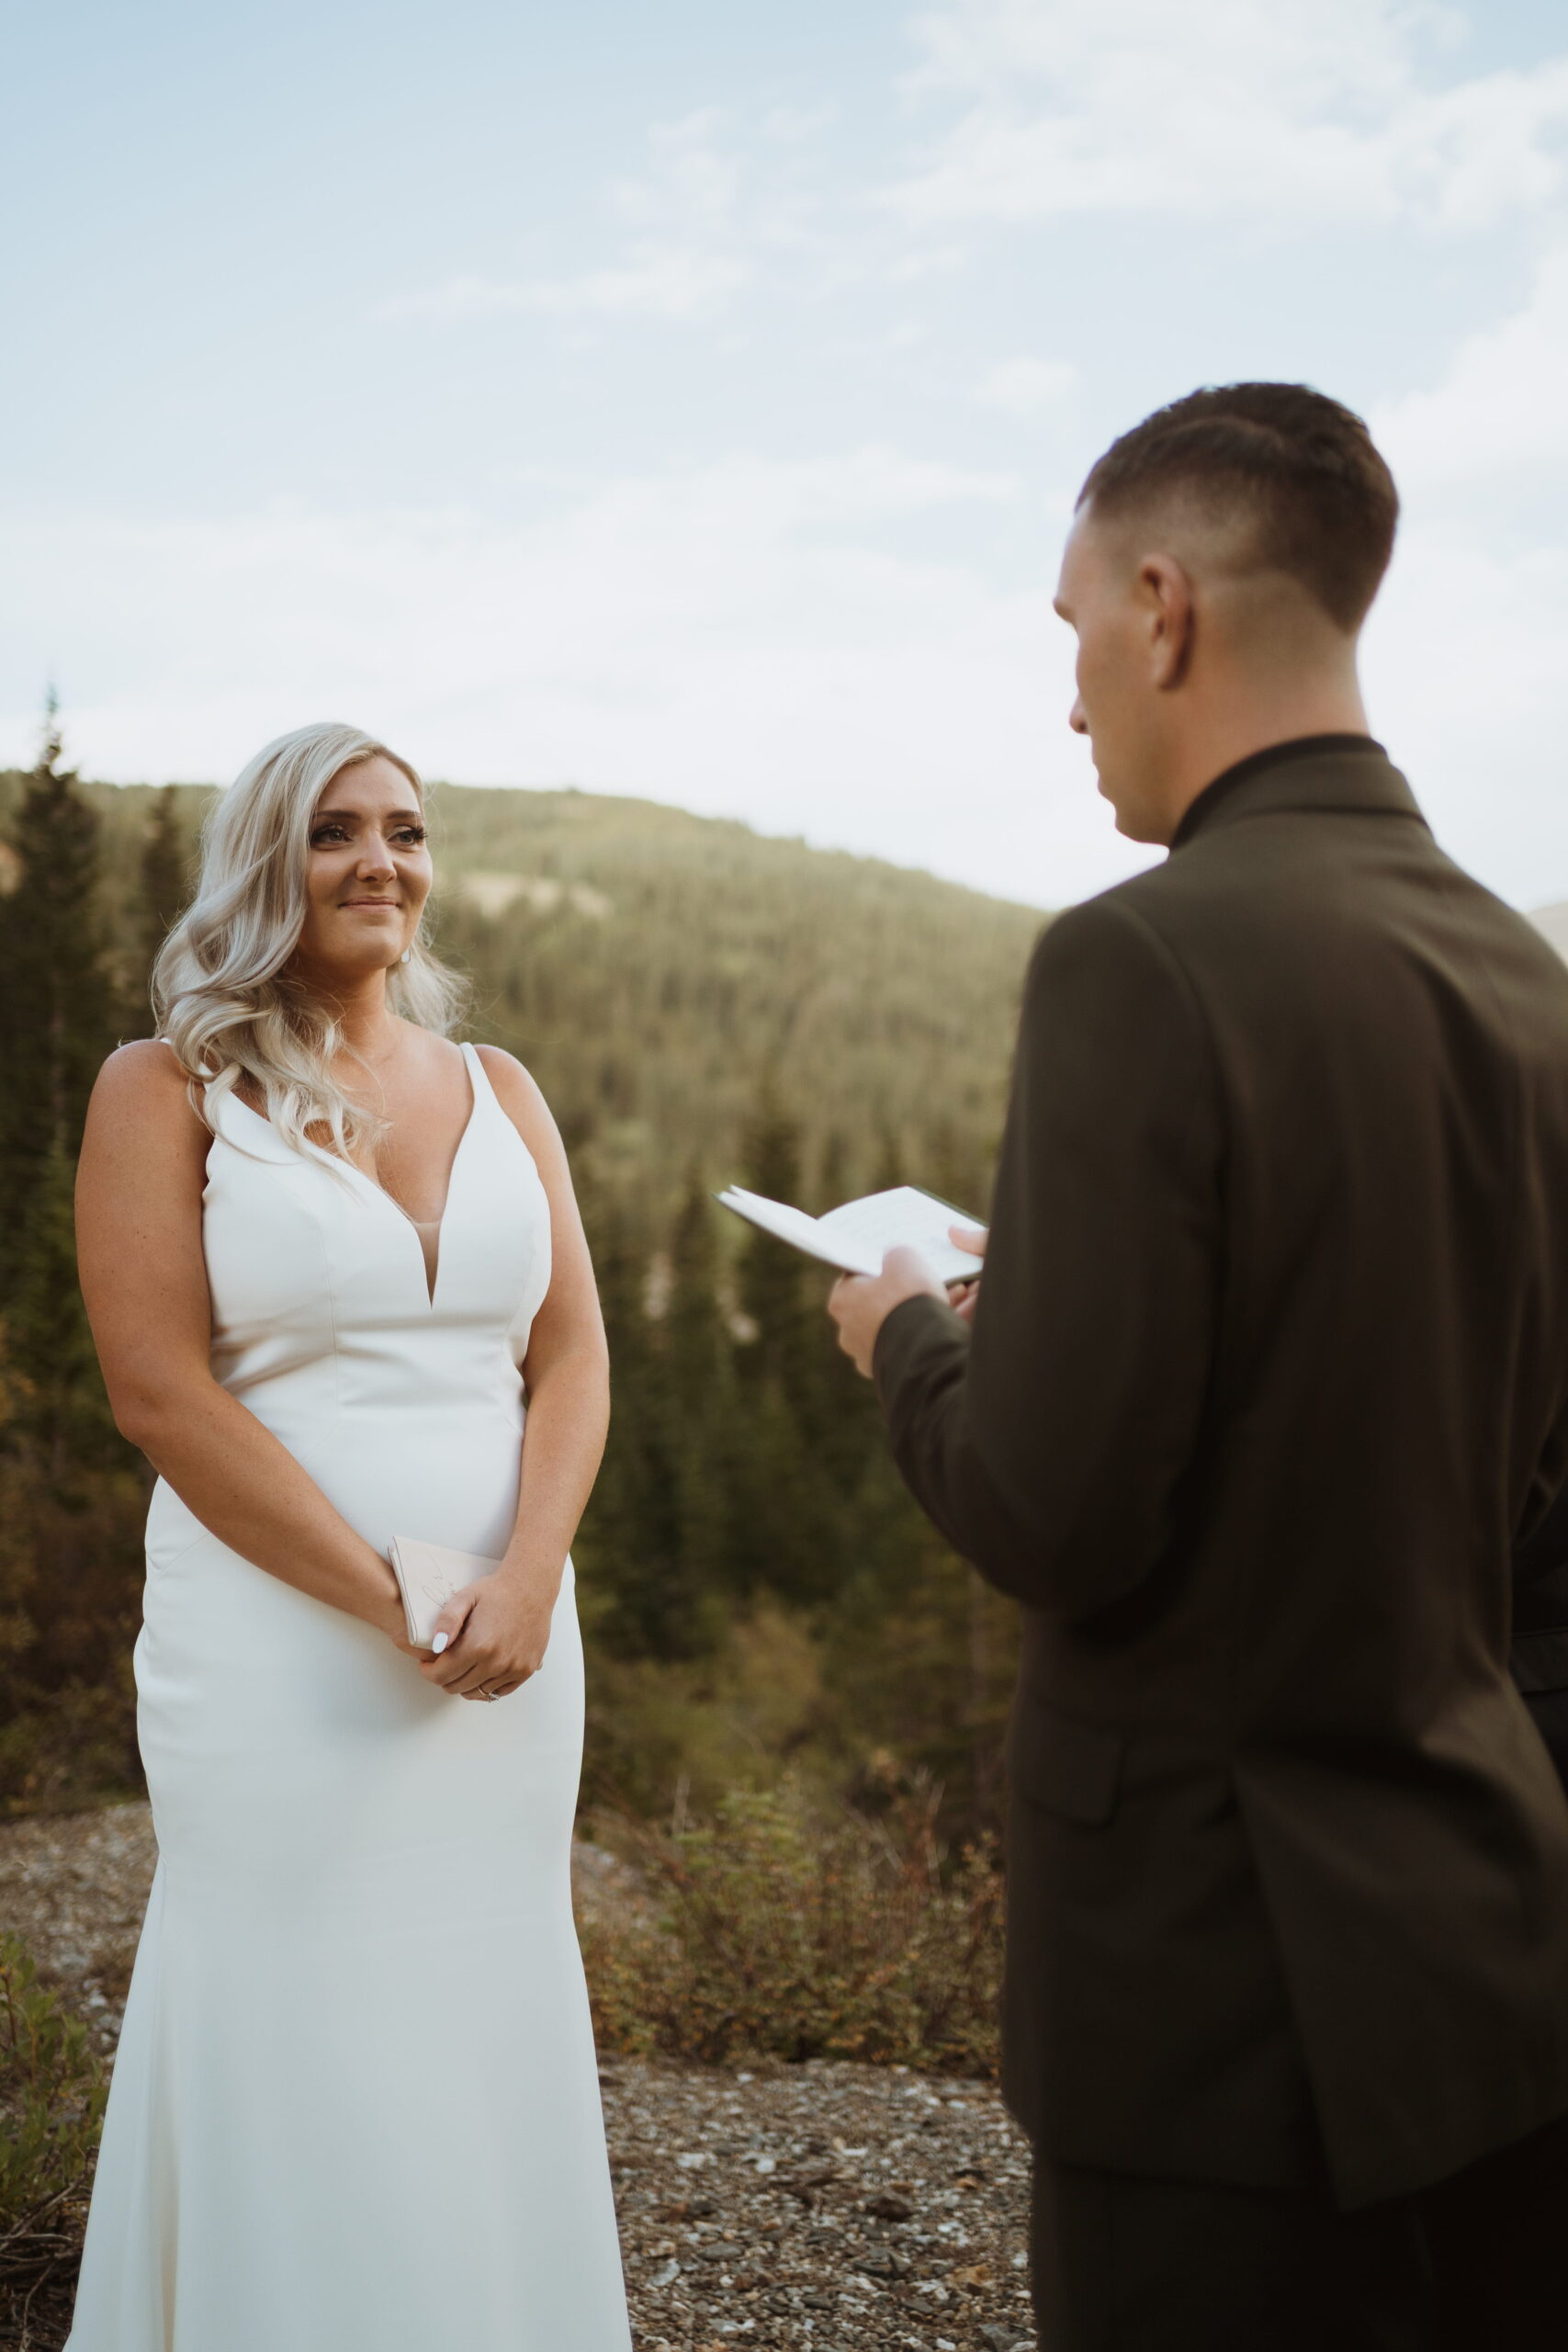 self solemnization after a hiking elopement. adventure wedding and off roading with dinner after the elopement.